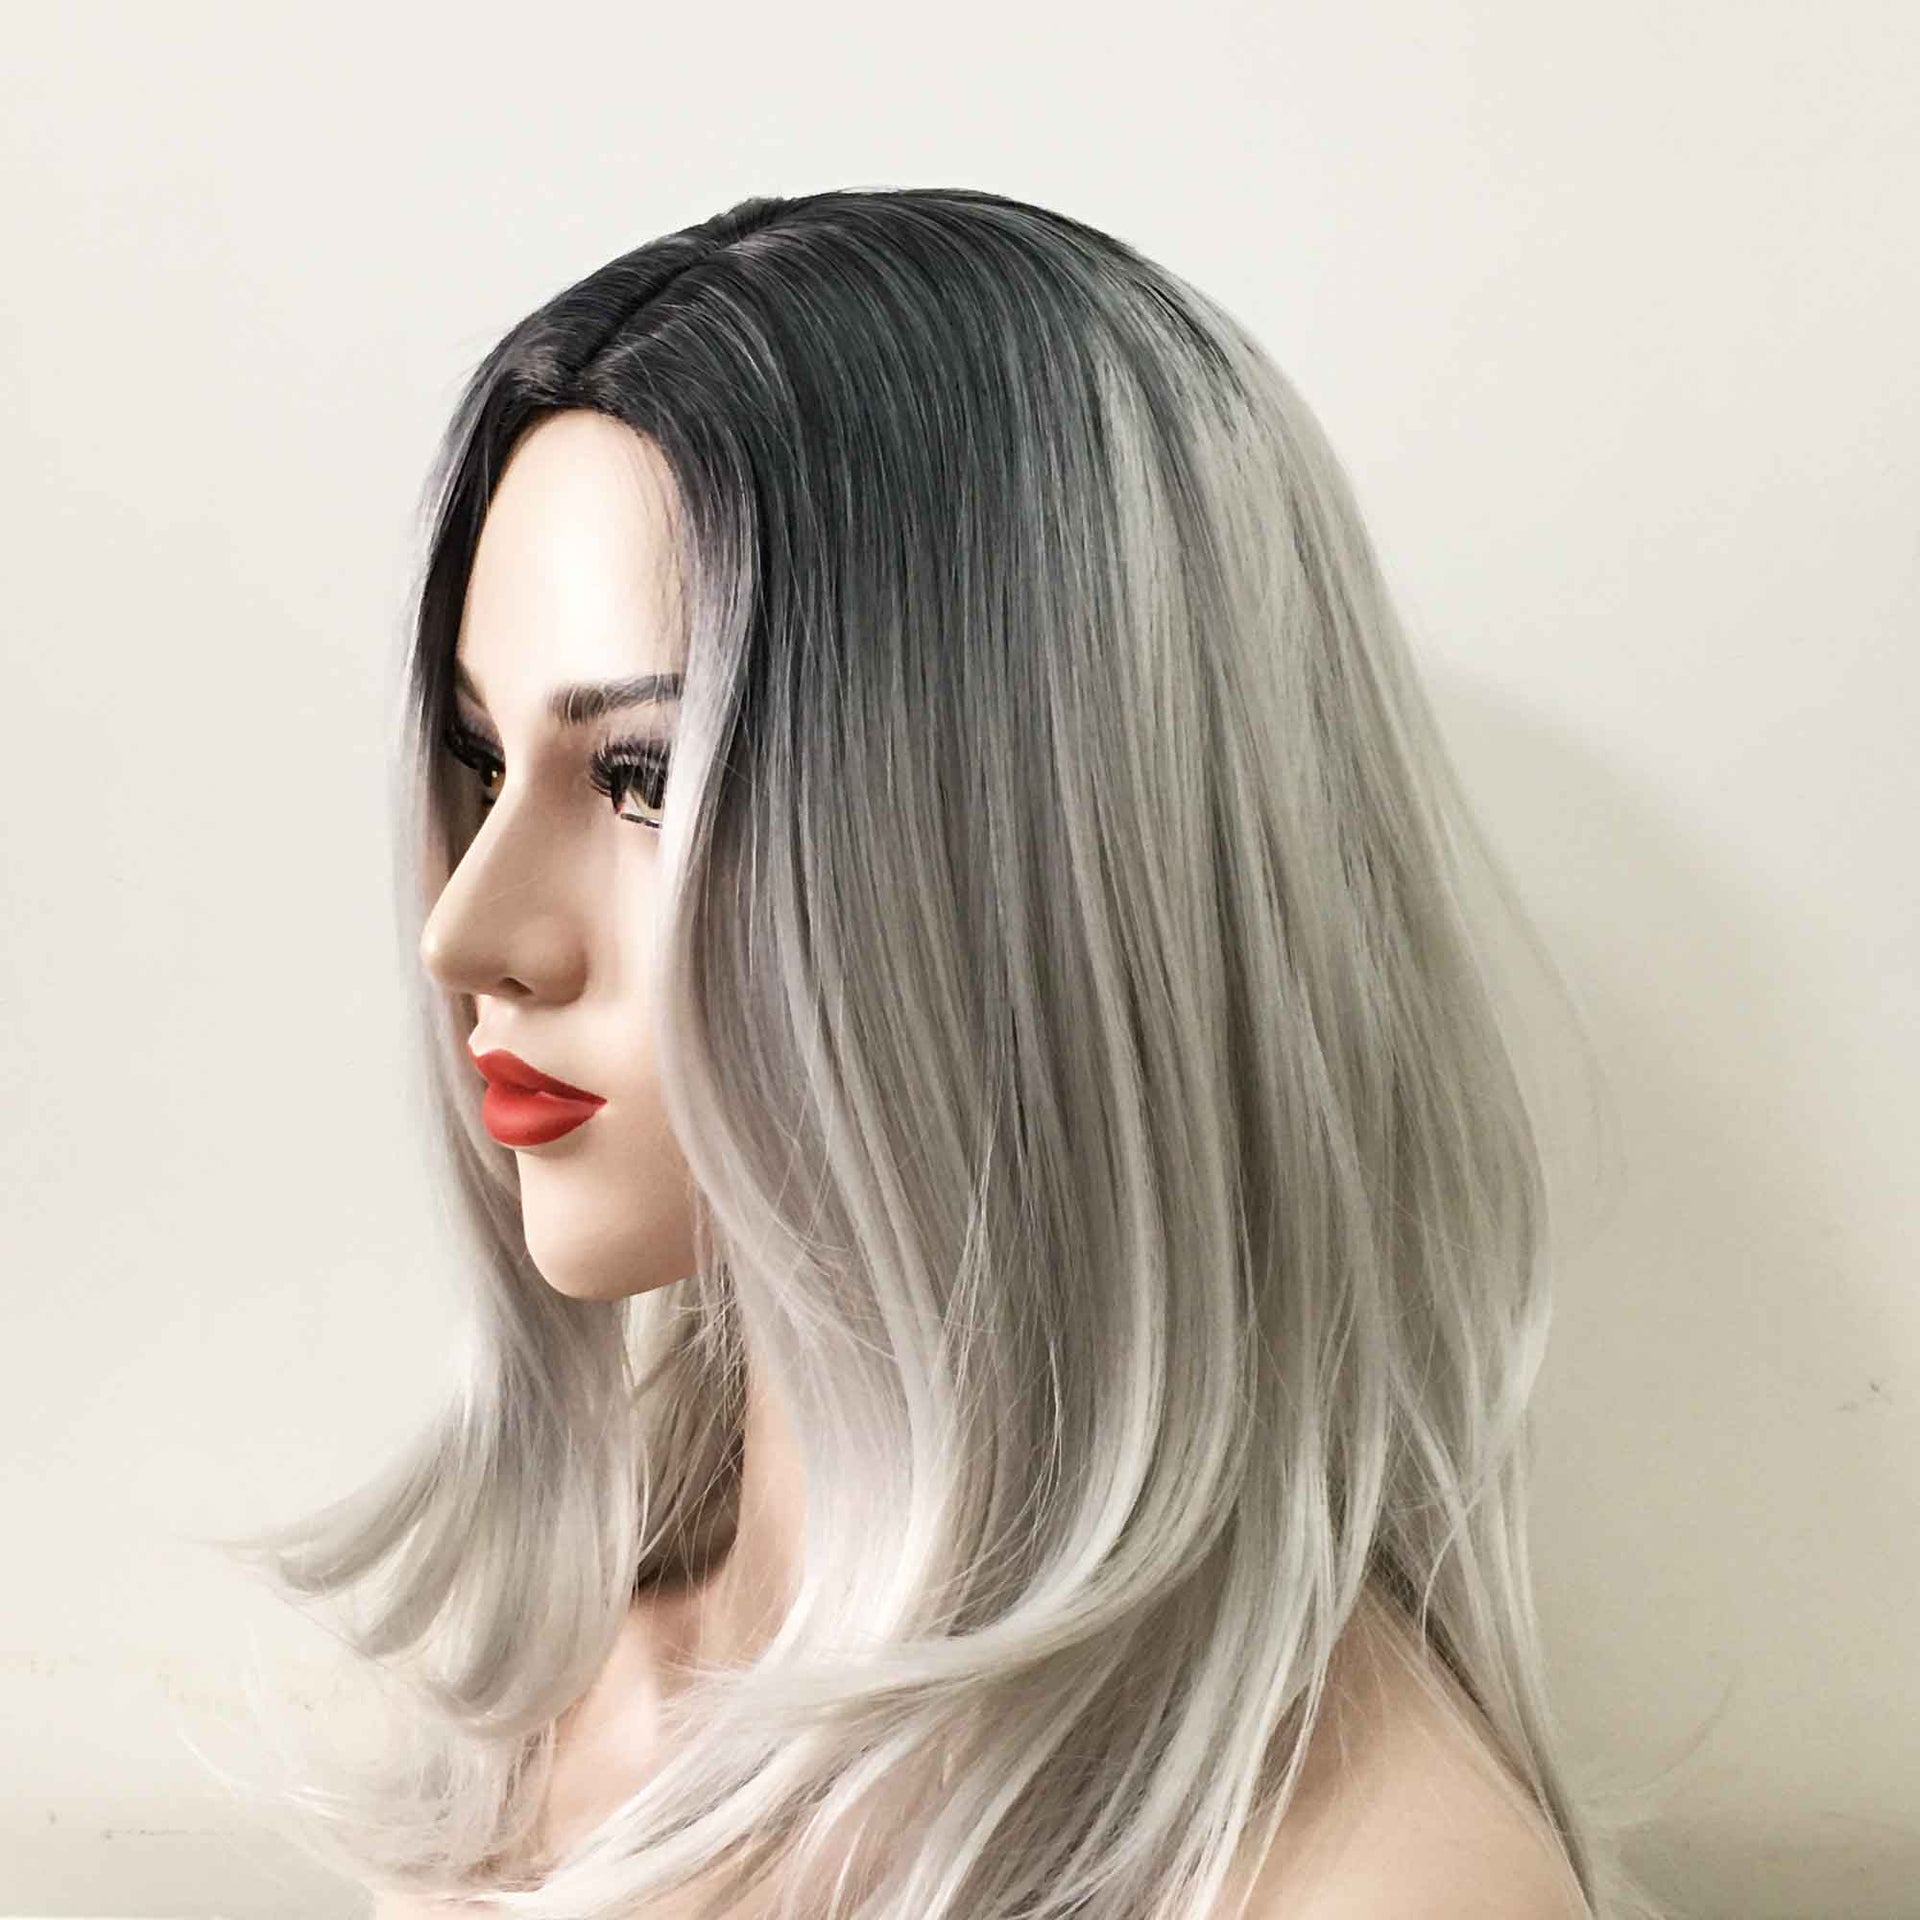 nevermindyrhead Women Grey Ombre Dark Root Long Straight Middle Part Wig